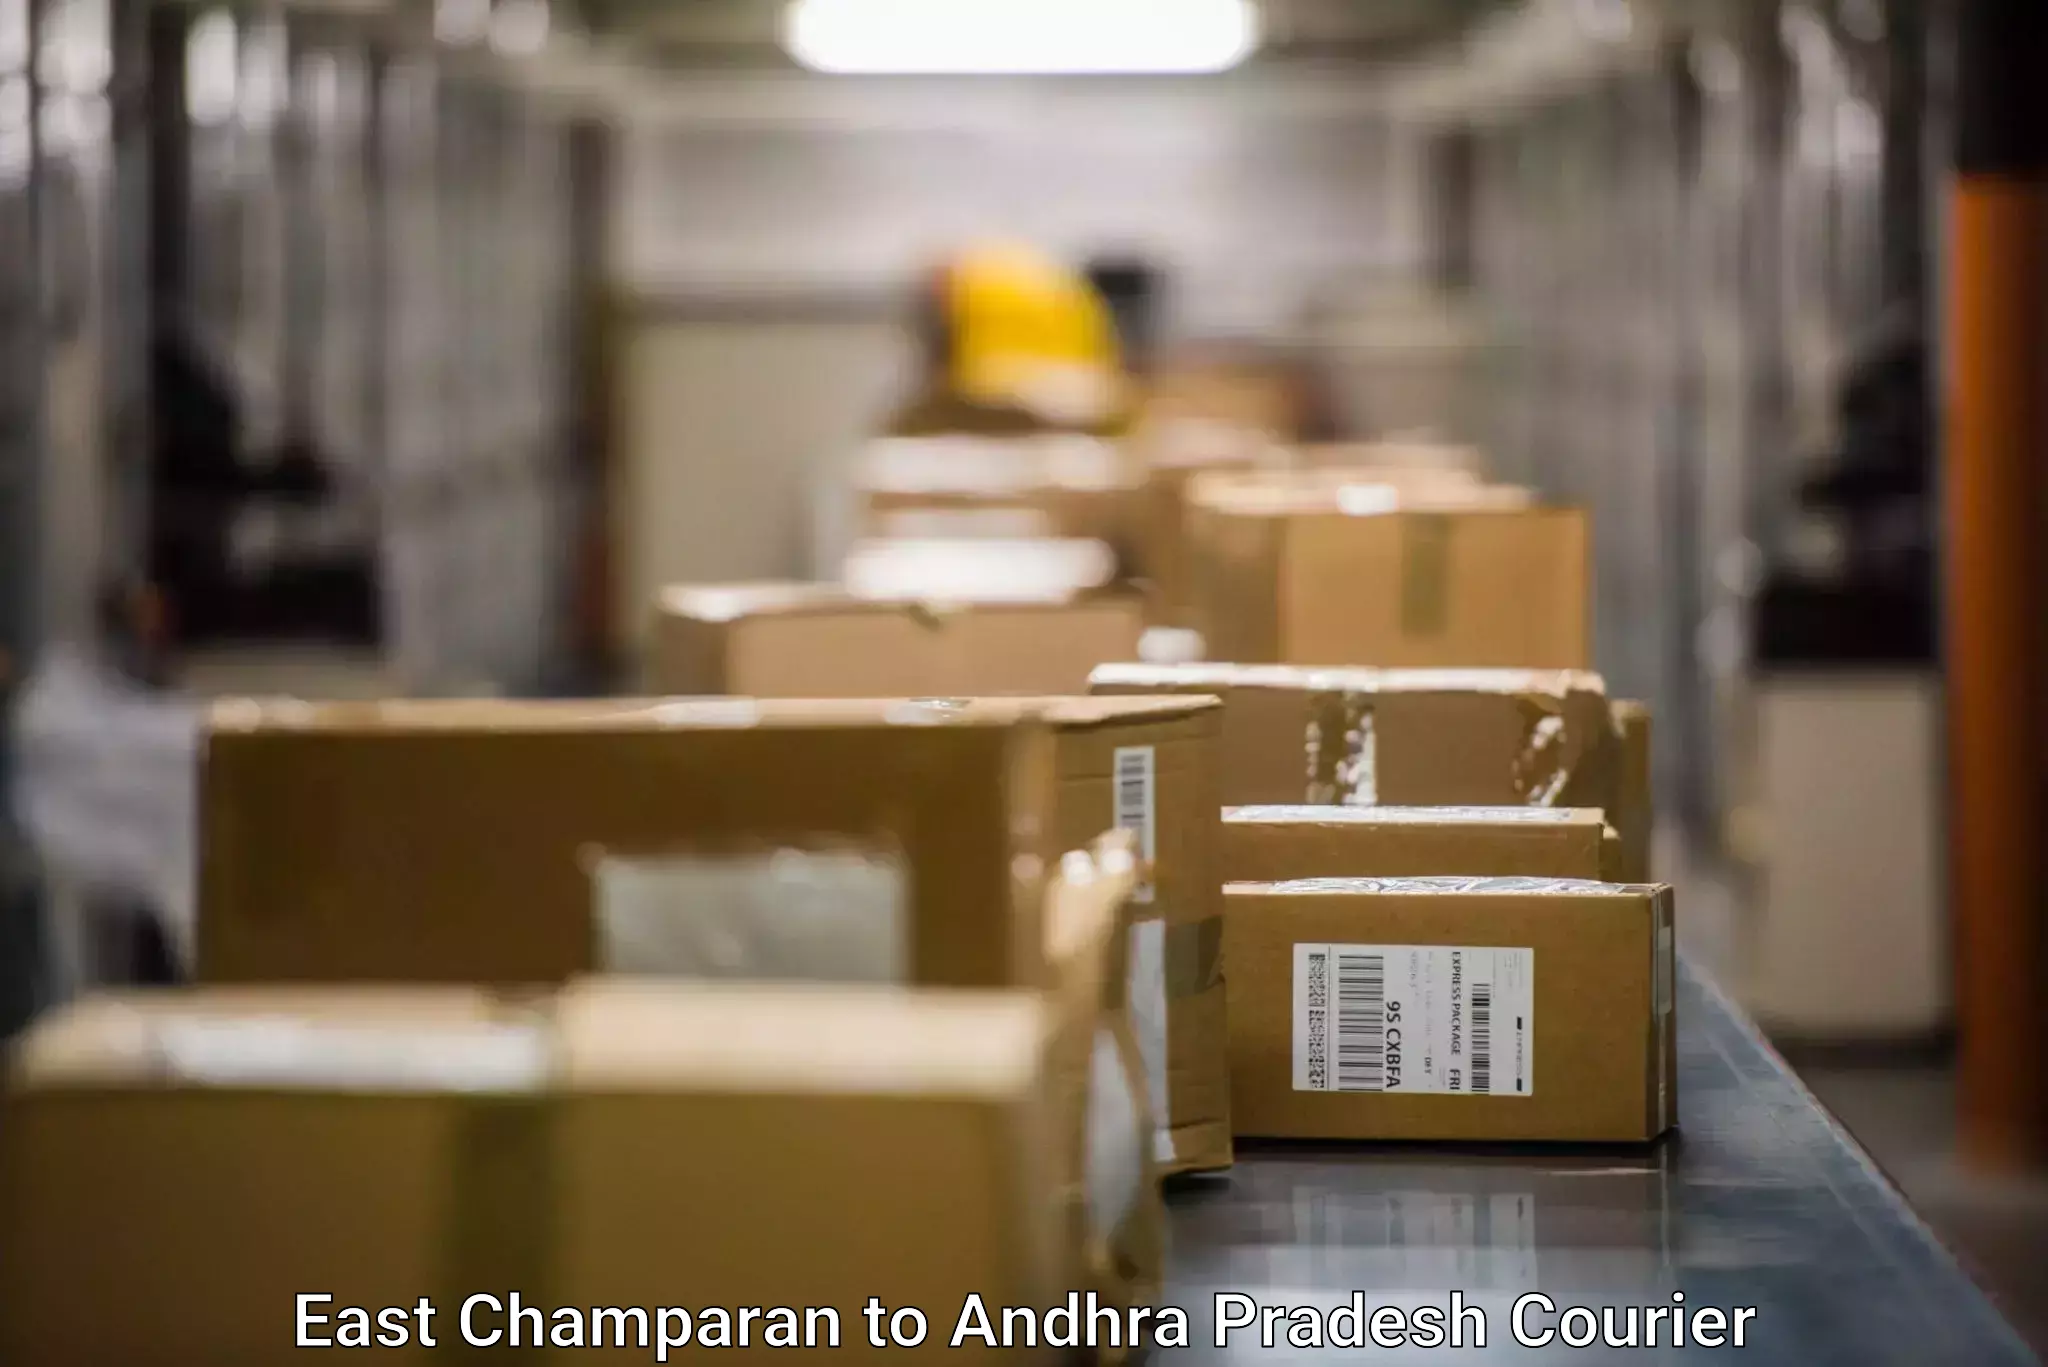 Custom courier packaging East Champaran to Andhra Pradesh